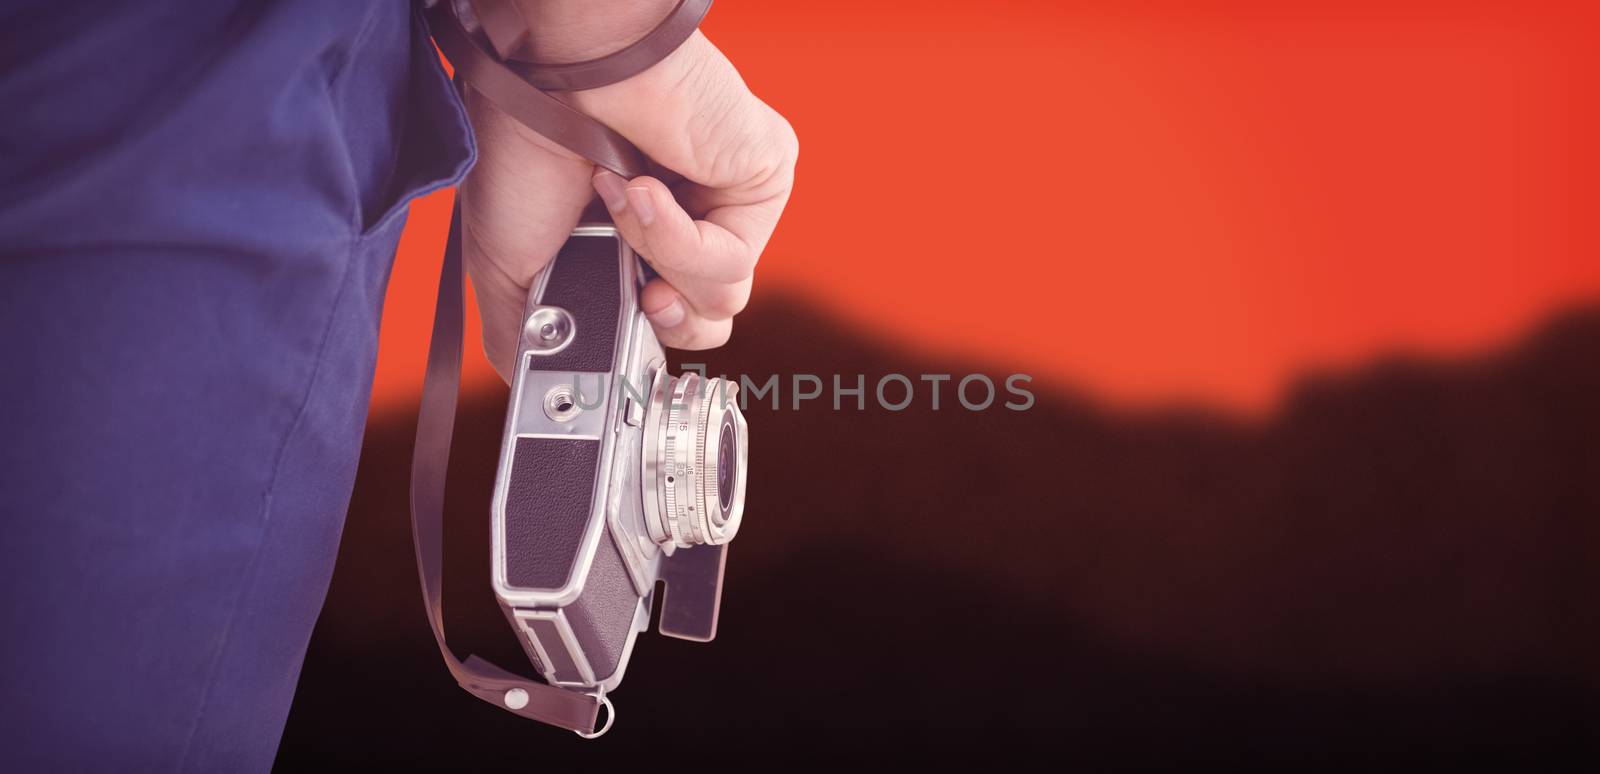 Cropped image of hipster holding camera against blurred mountains